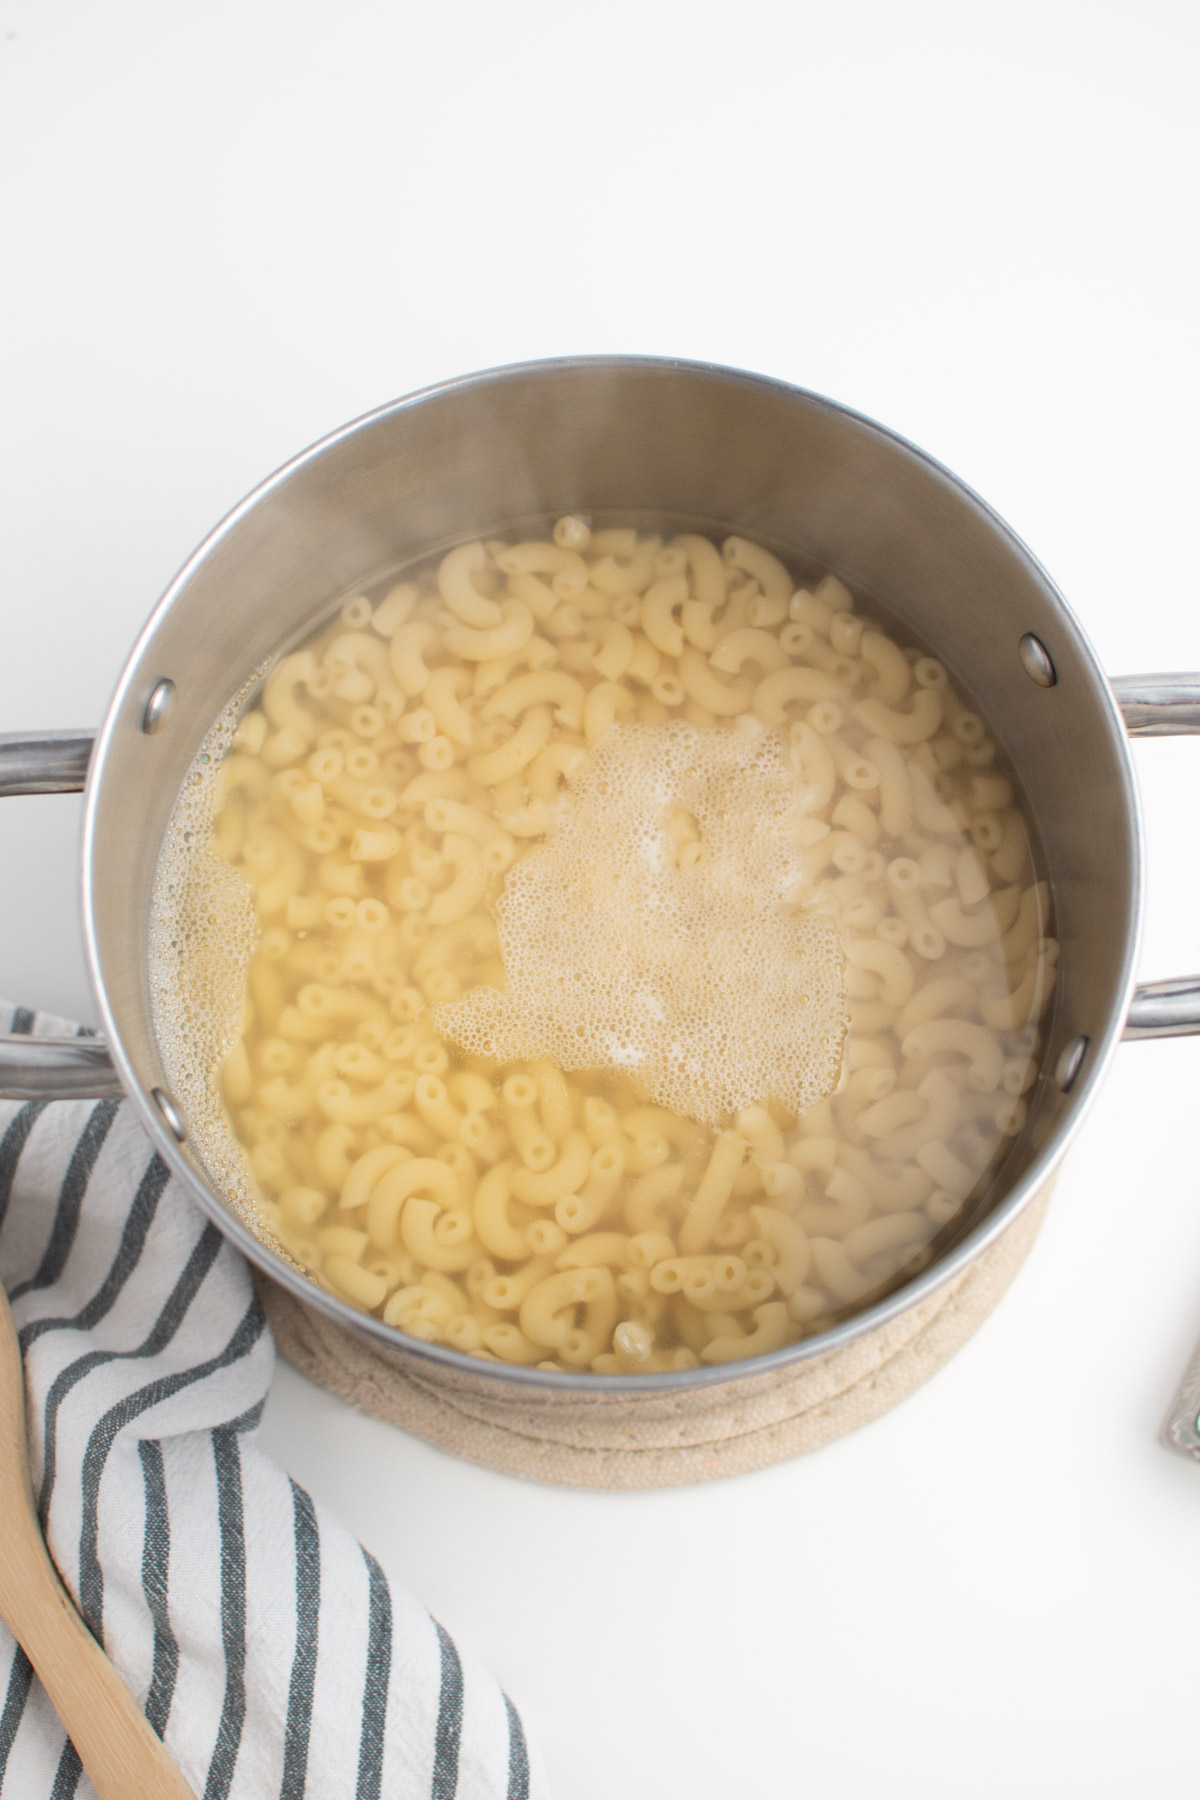 Cooked macaroni noodles and water in large metal pot on white table.